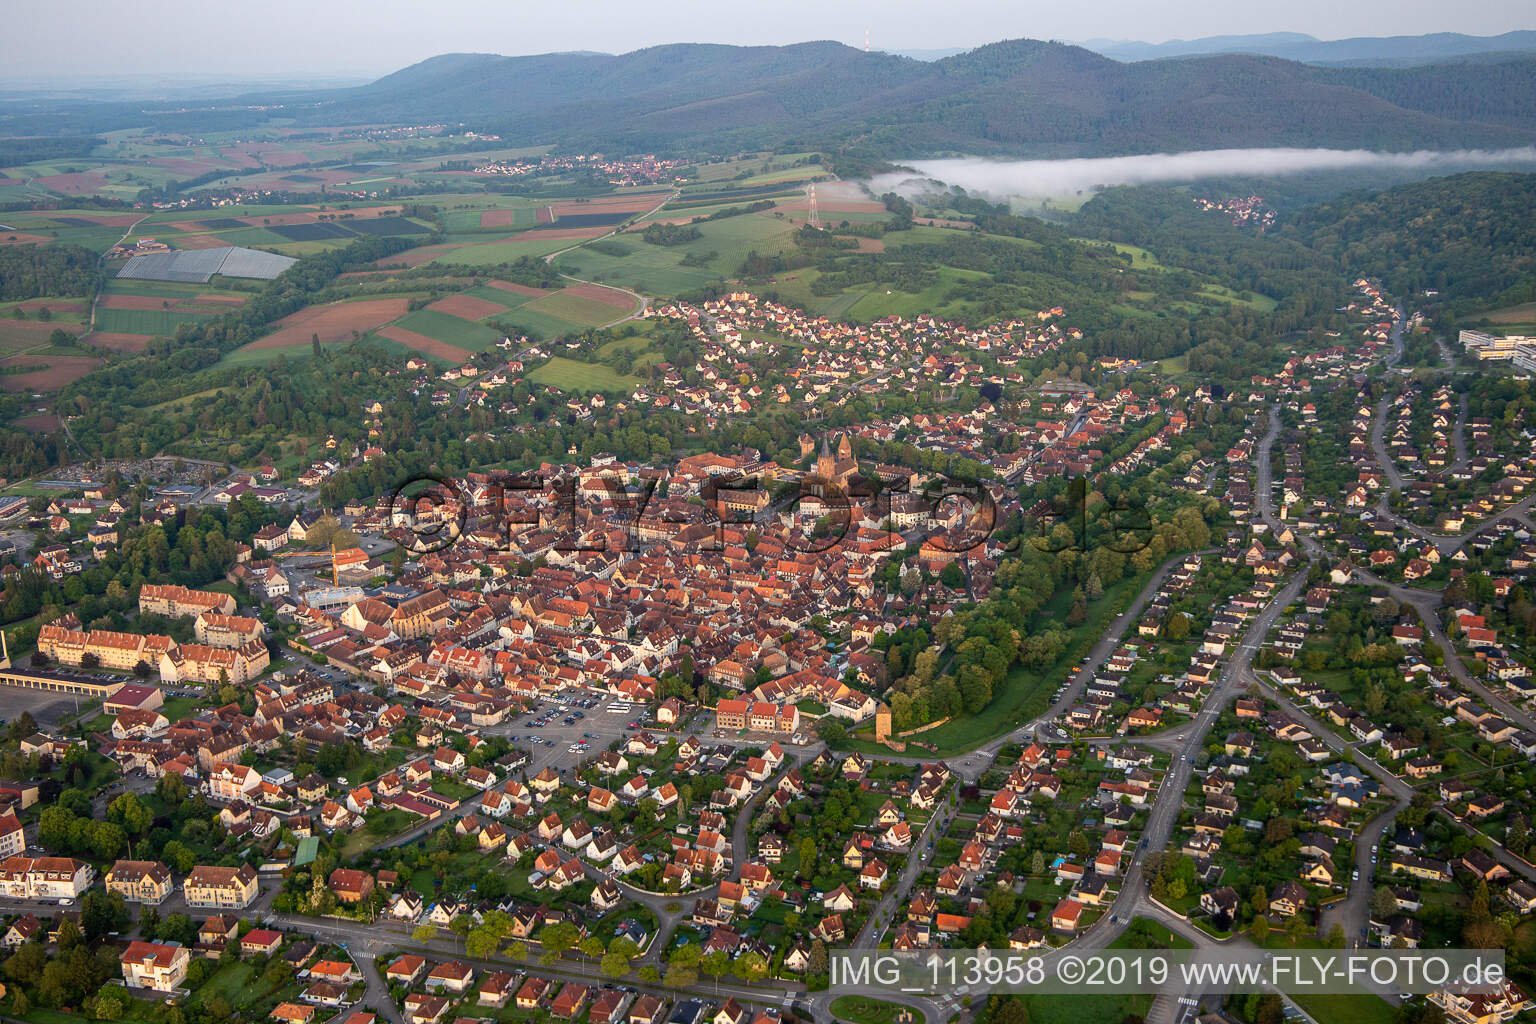 Wissembourg in the state Bas-Rhin, France seen from a drone